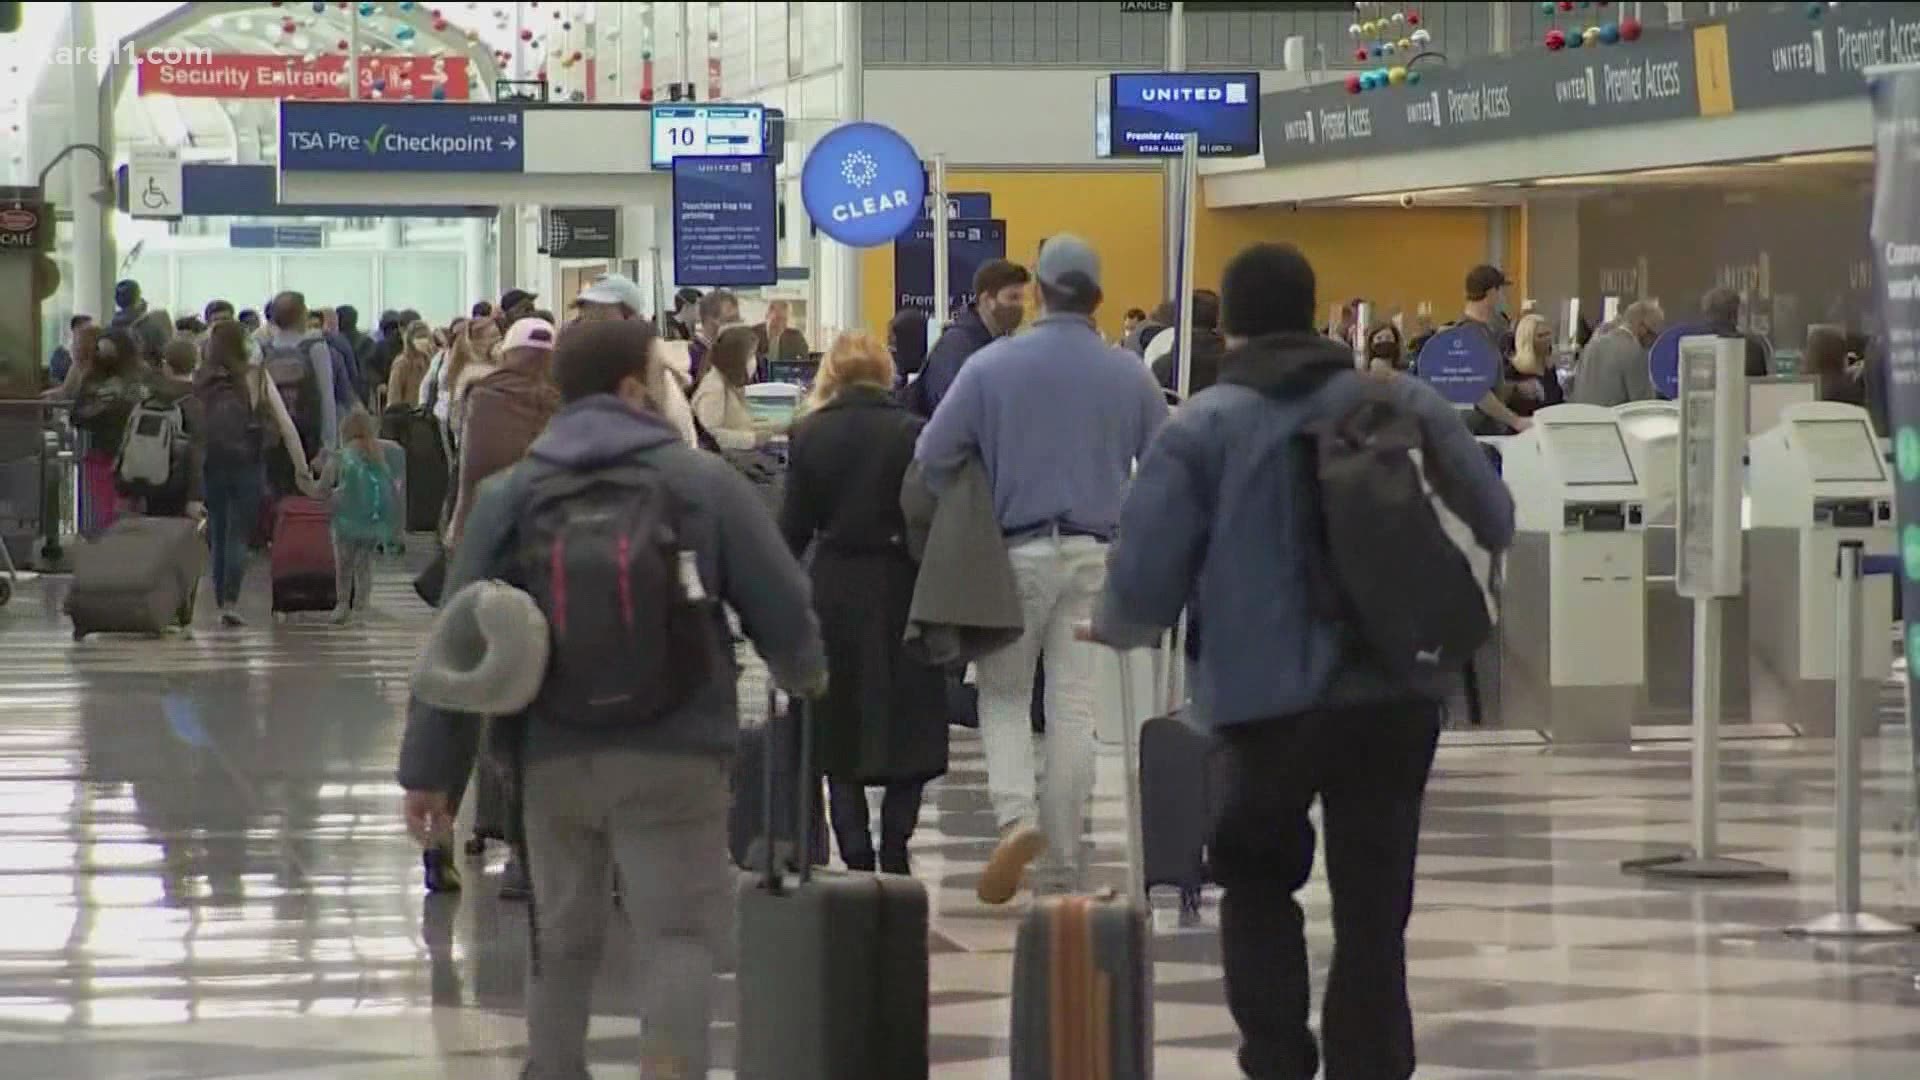 As millions of people took to the skies for holiday travel, public health experts continue to issue warnings about the potential dangers of spreading COVID 19.